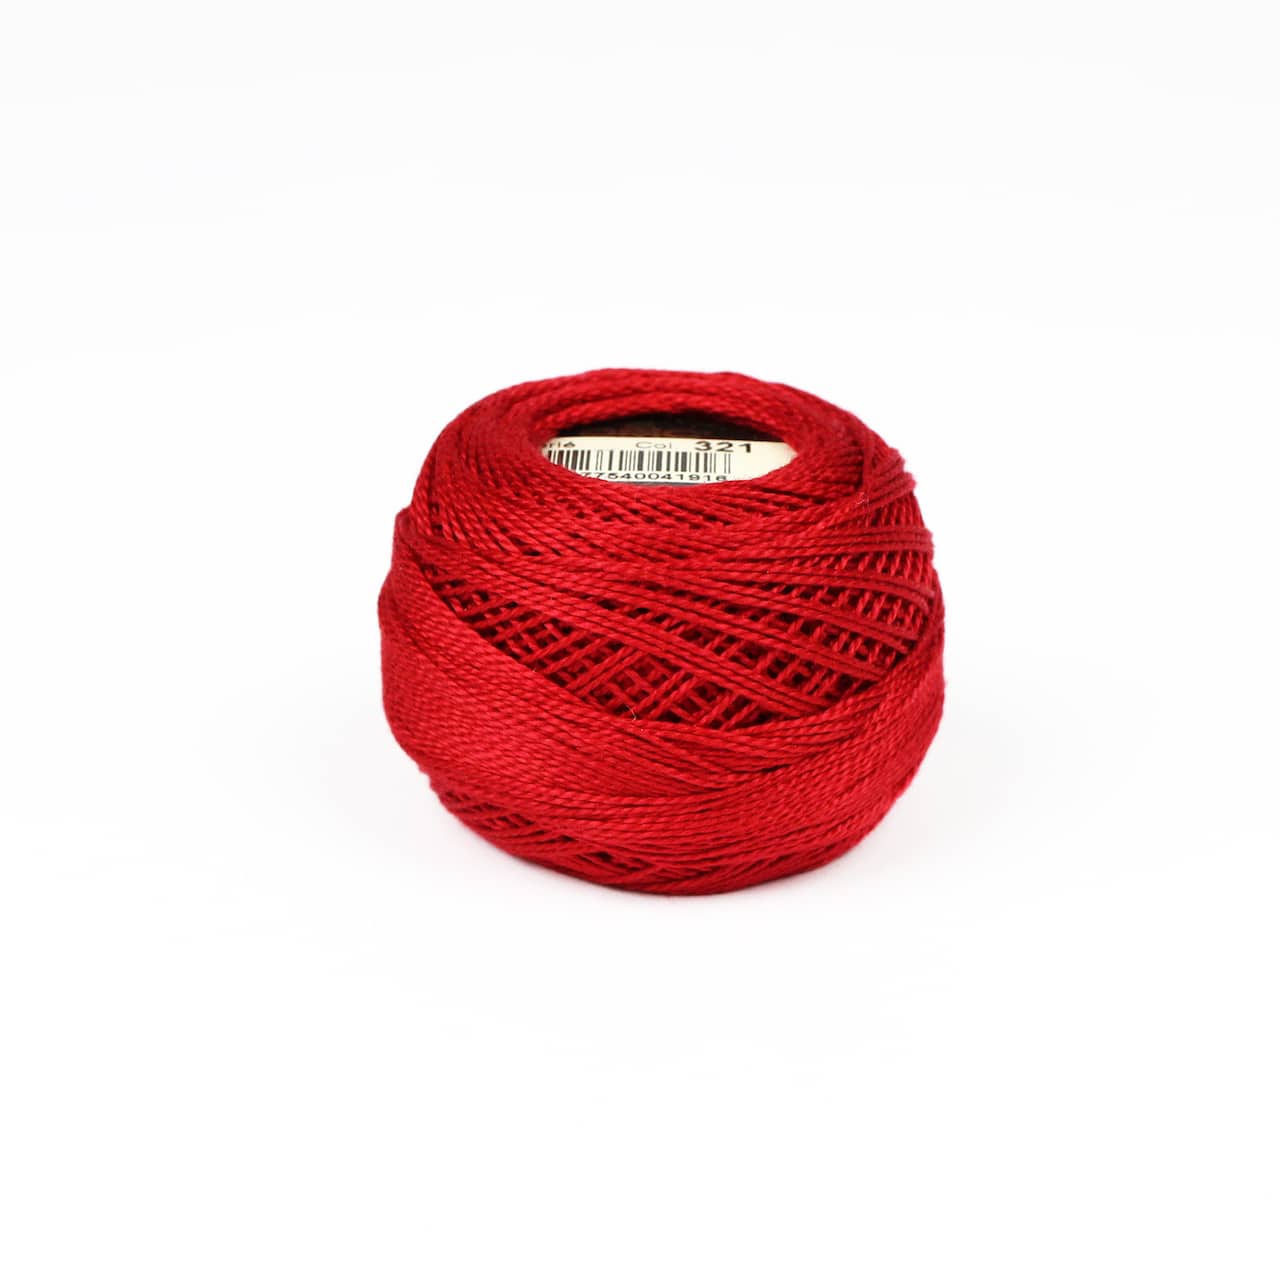 DMC Pearl Cotton Ball Size 8 87yd (Red)